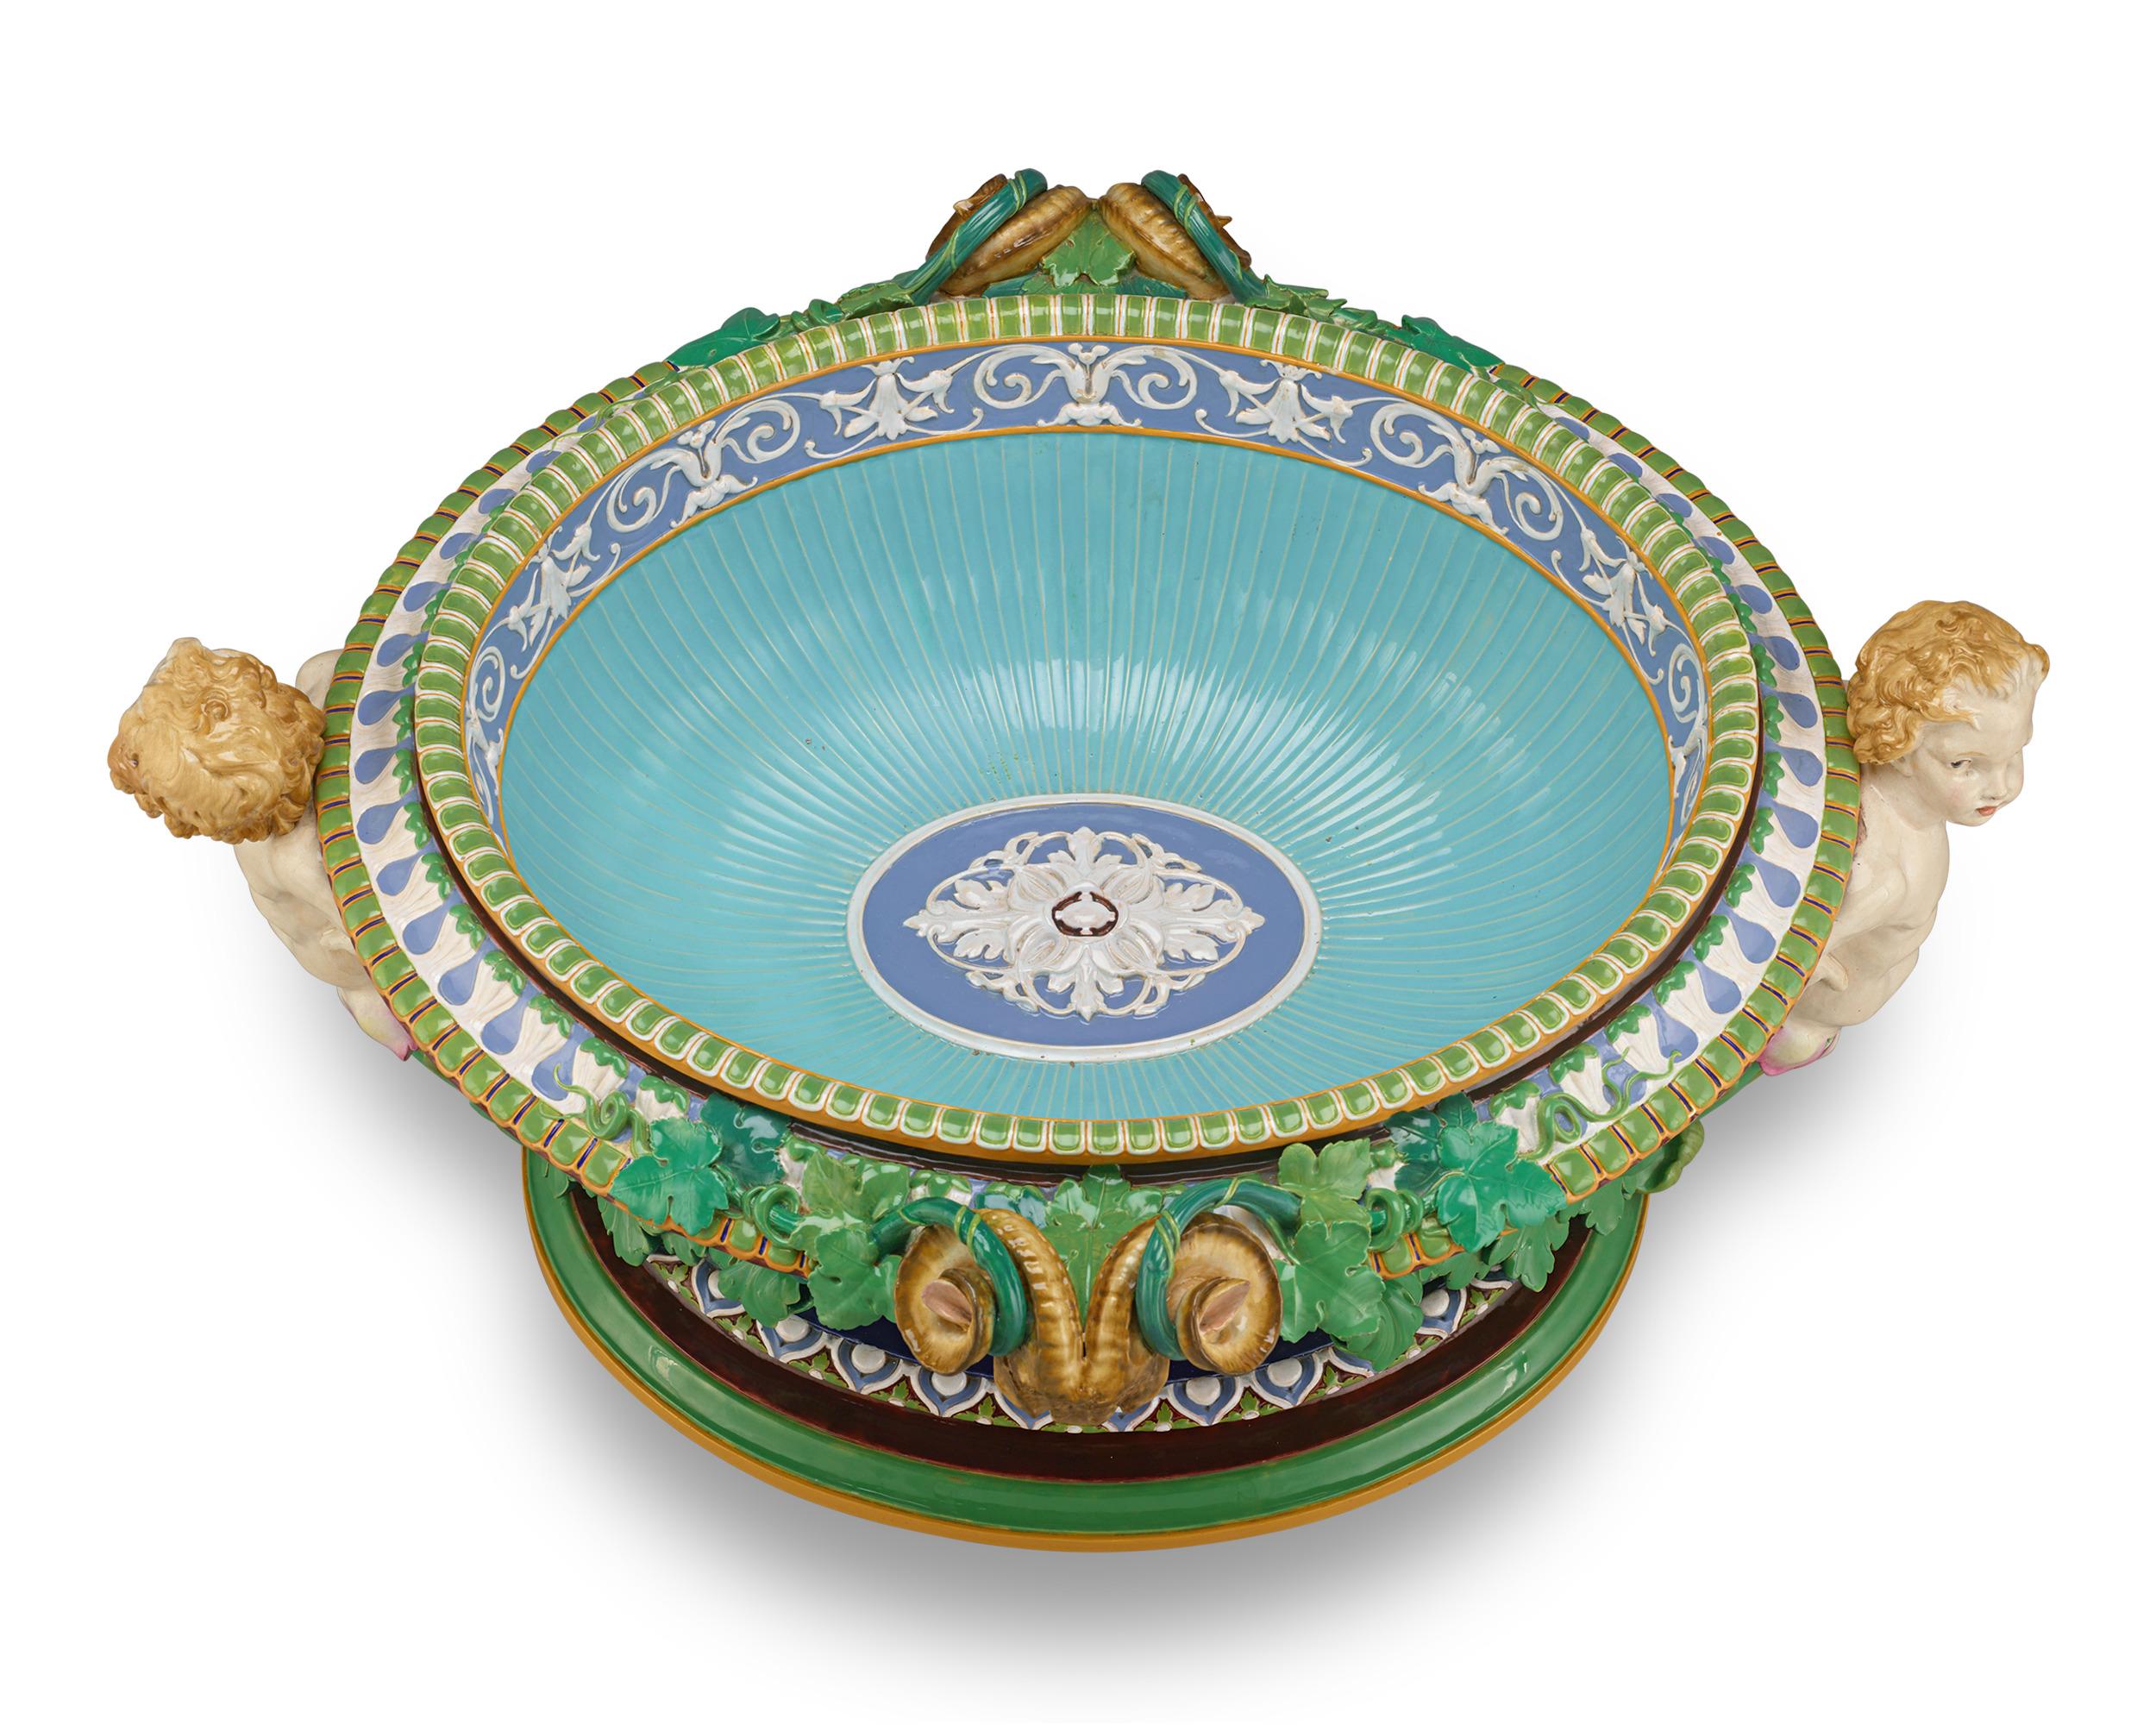 Bearing a cipher mark from 1856, this mid-19th-century centerpiece stands as a crowning achievement of the esteemed firm Minton & Co. This accomplishment of such grand scale in ceramic artistry, combined with intricate detail and rich, jewel-toned